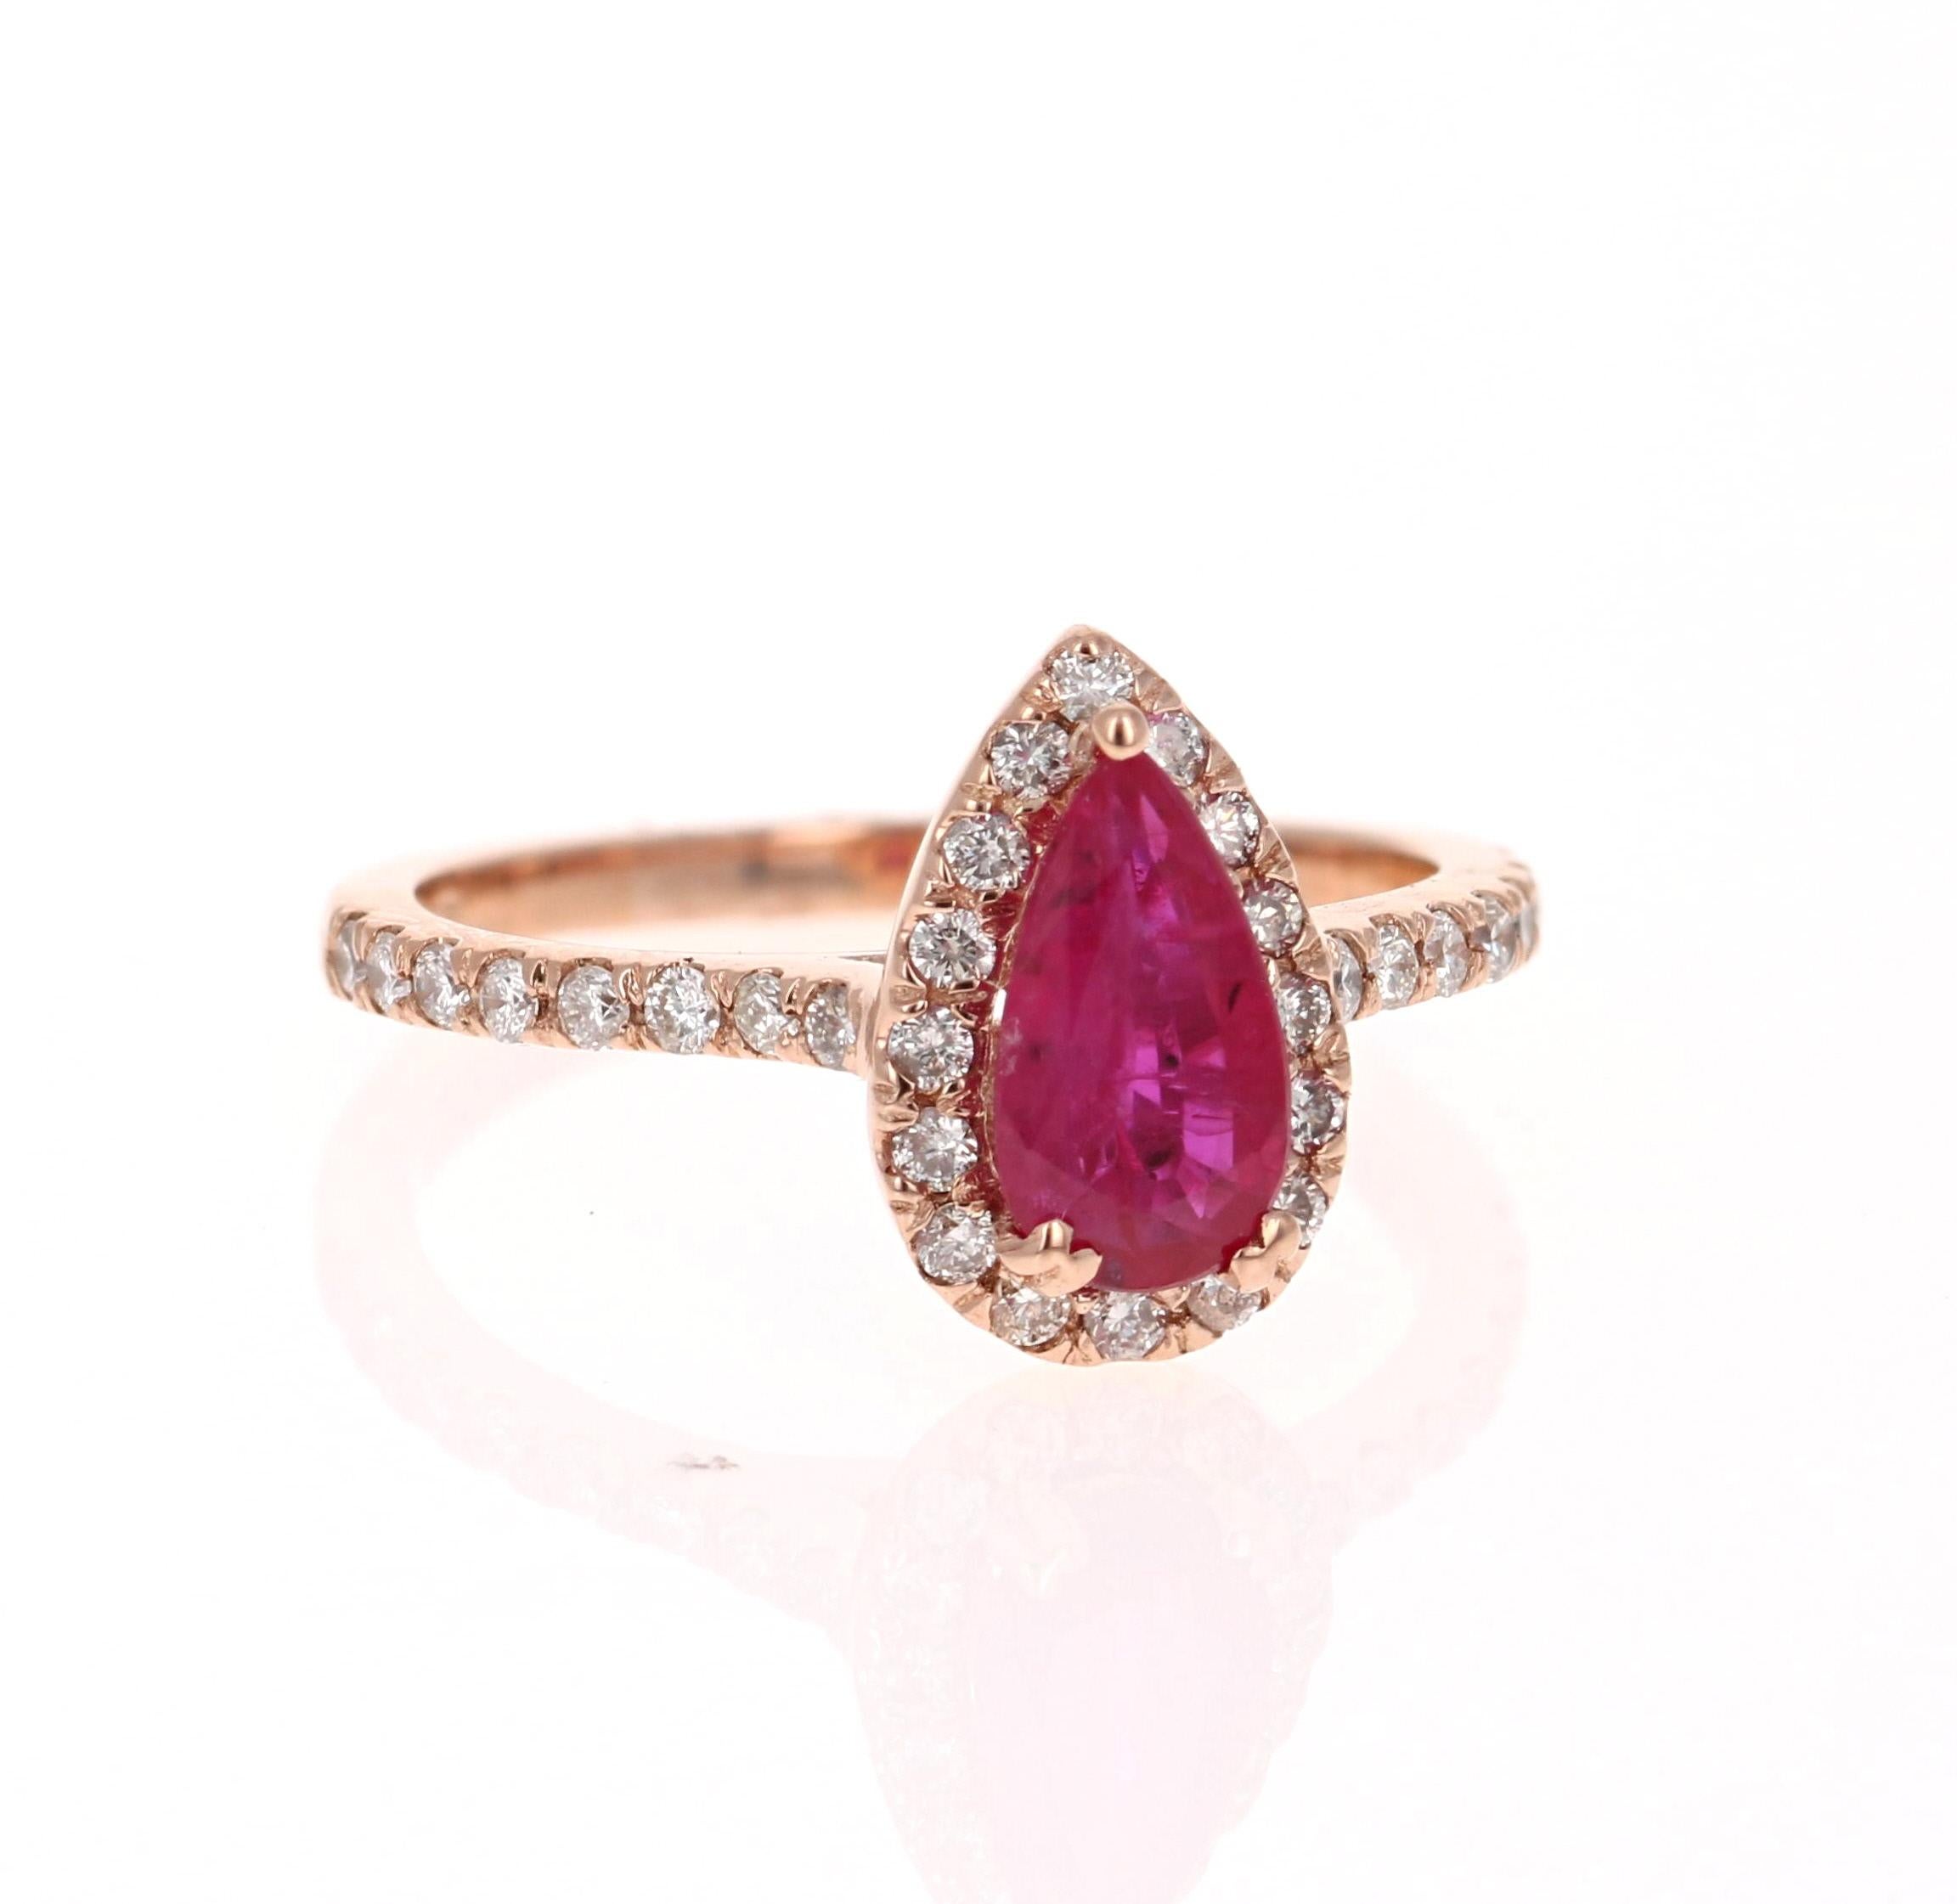 GIA Certified 1.41 Carat Ruby Diamond 14 Karat Rose Gold Bridal Ring

This ring is truly a beauty and can easily be transformed into a unique engagement or bridal ring!
There is a GIA Certified Pear Cut Ruby set in the center of the ring that weighs